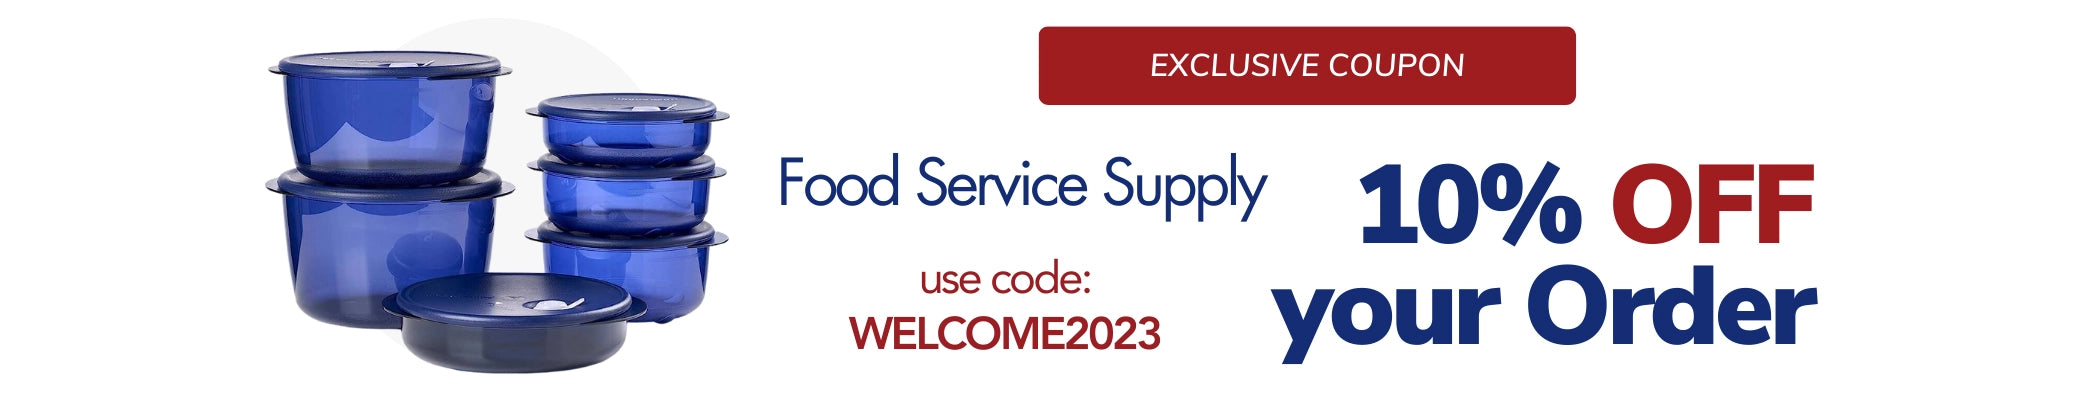 Tupperware, utensils, and much more food supply with 10%off when using the code WELCOME2023